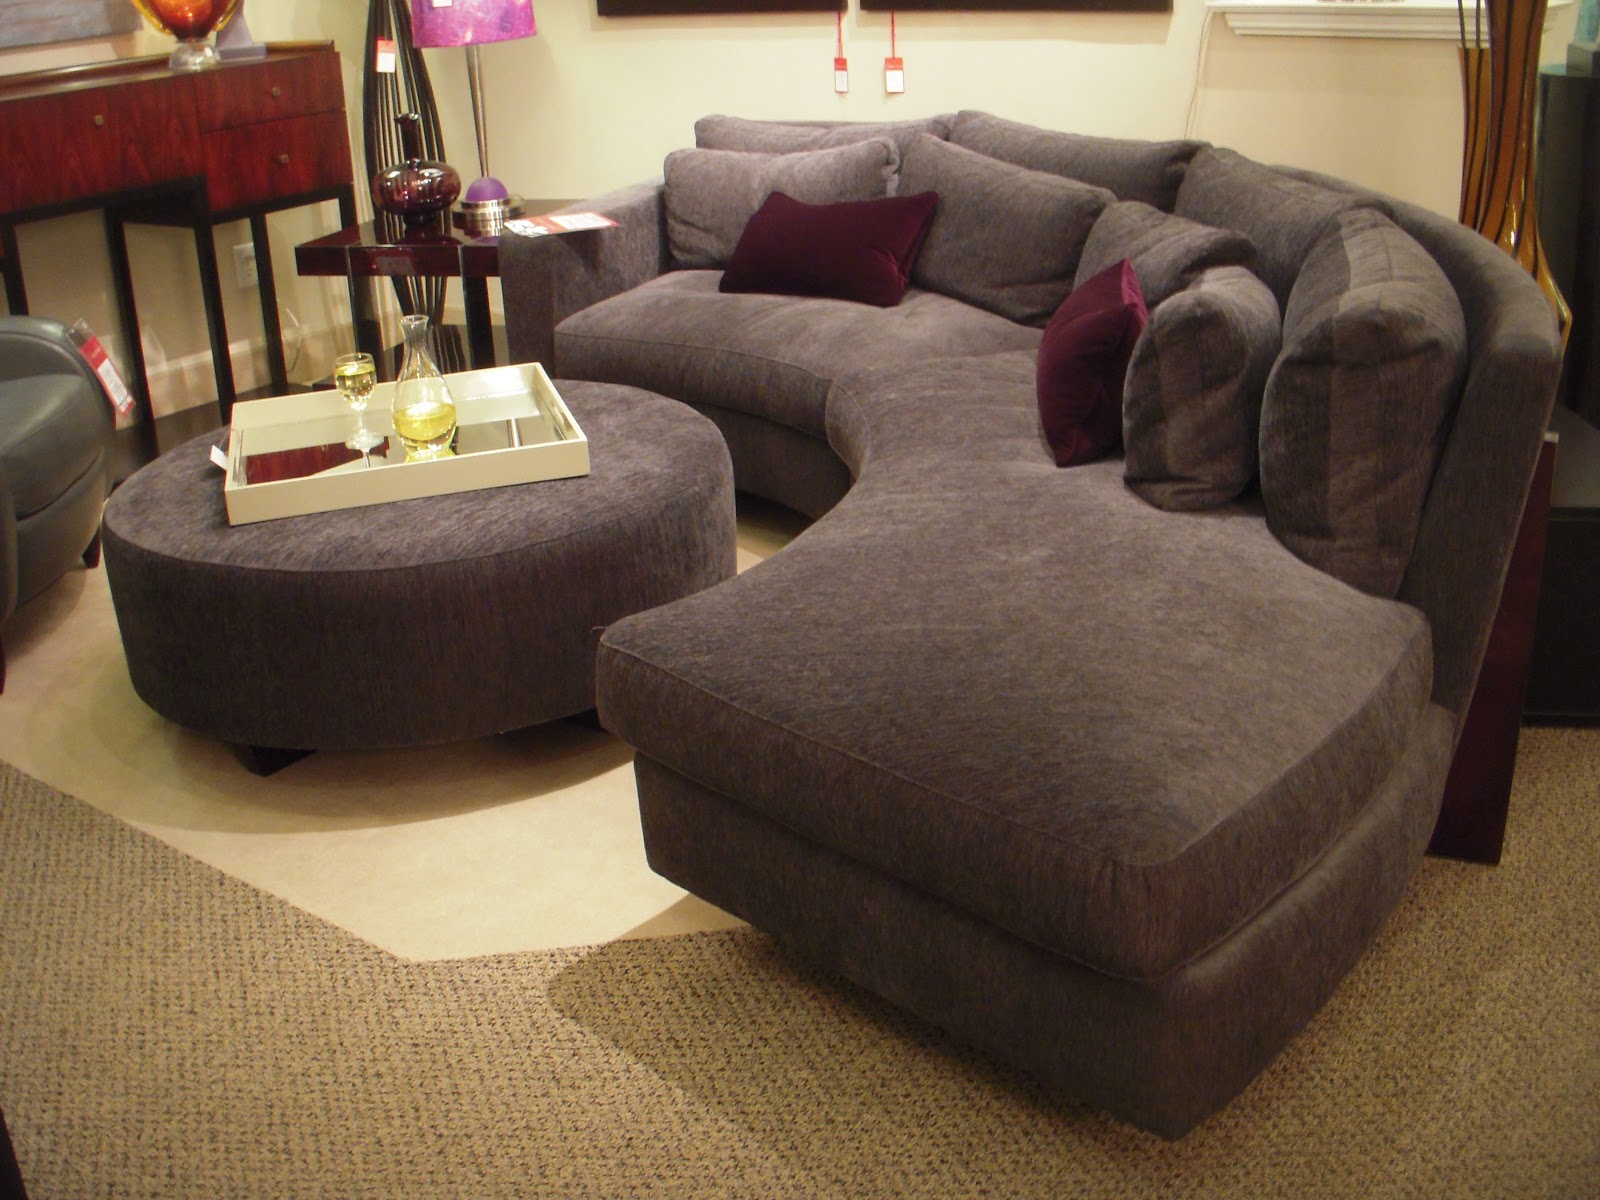 Where To Buy Cheap Sectional Sofas Interior Design